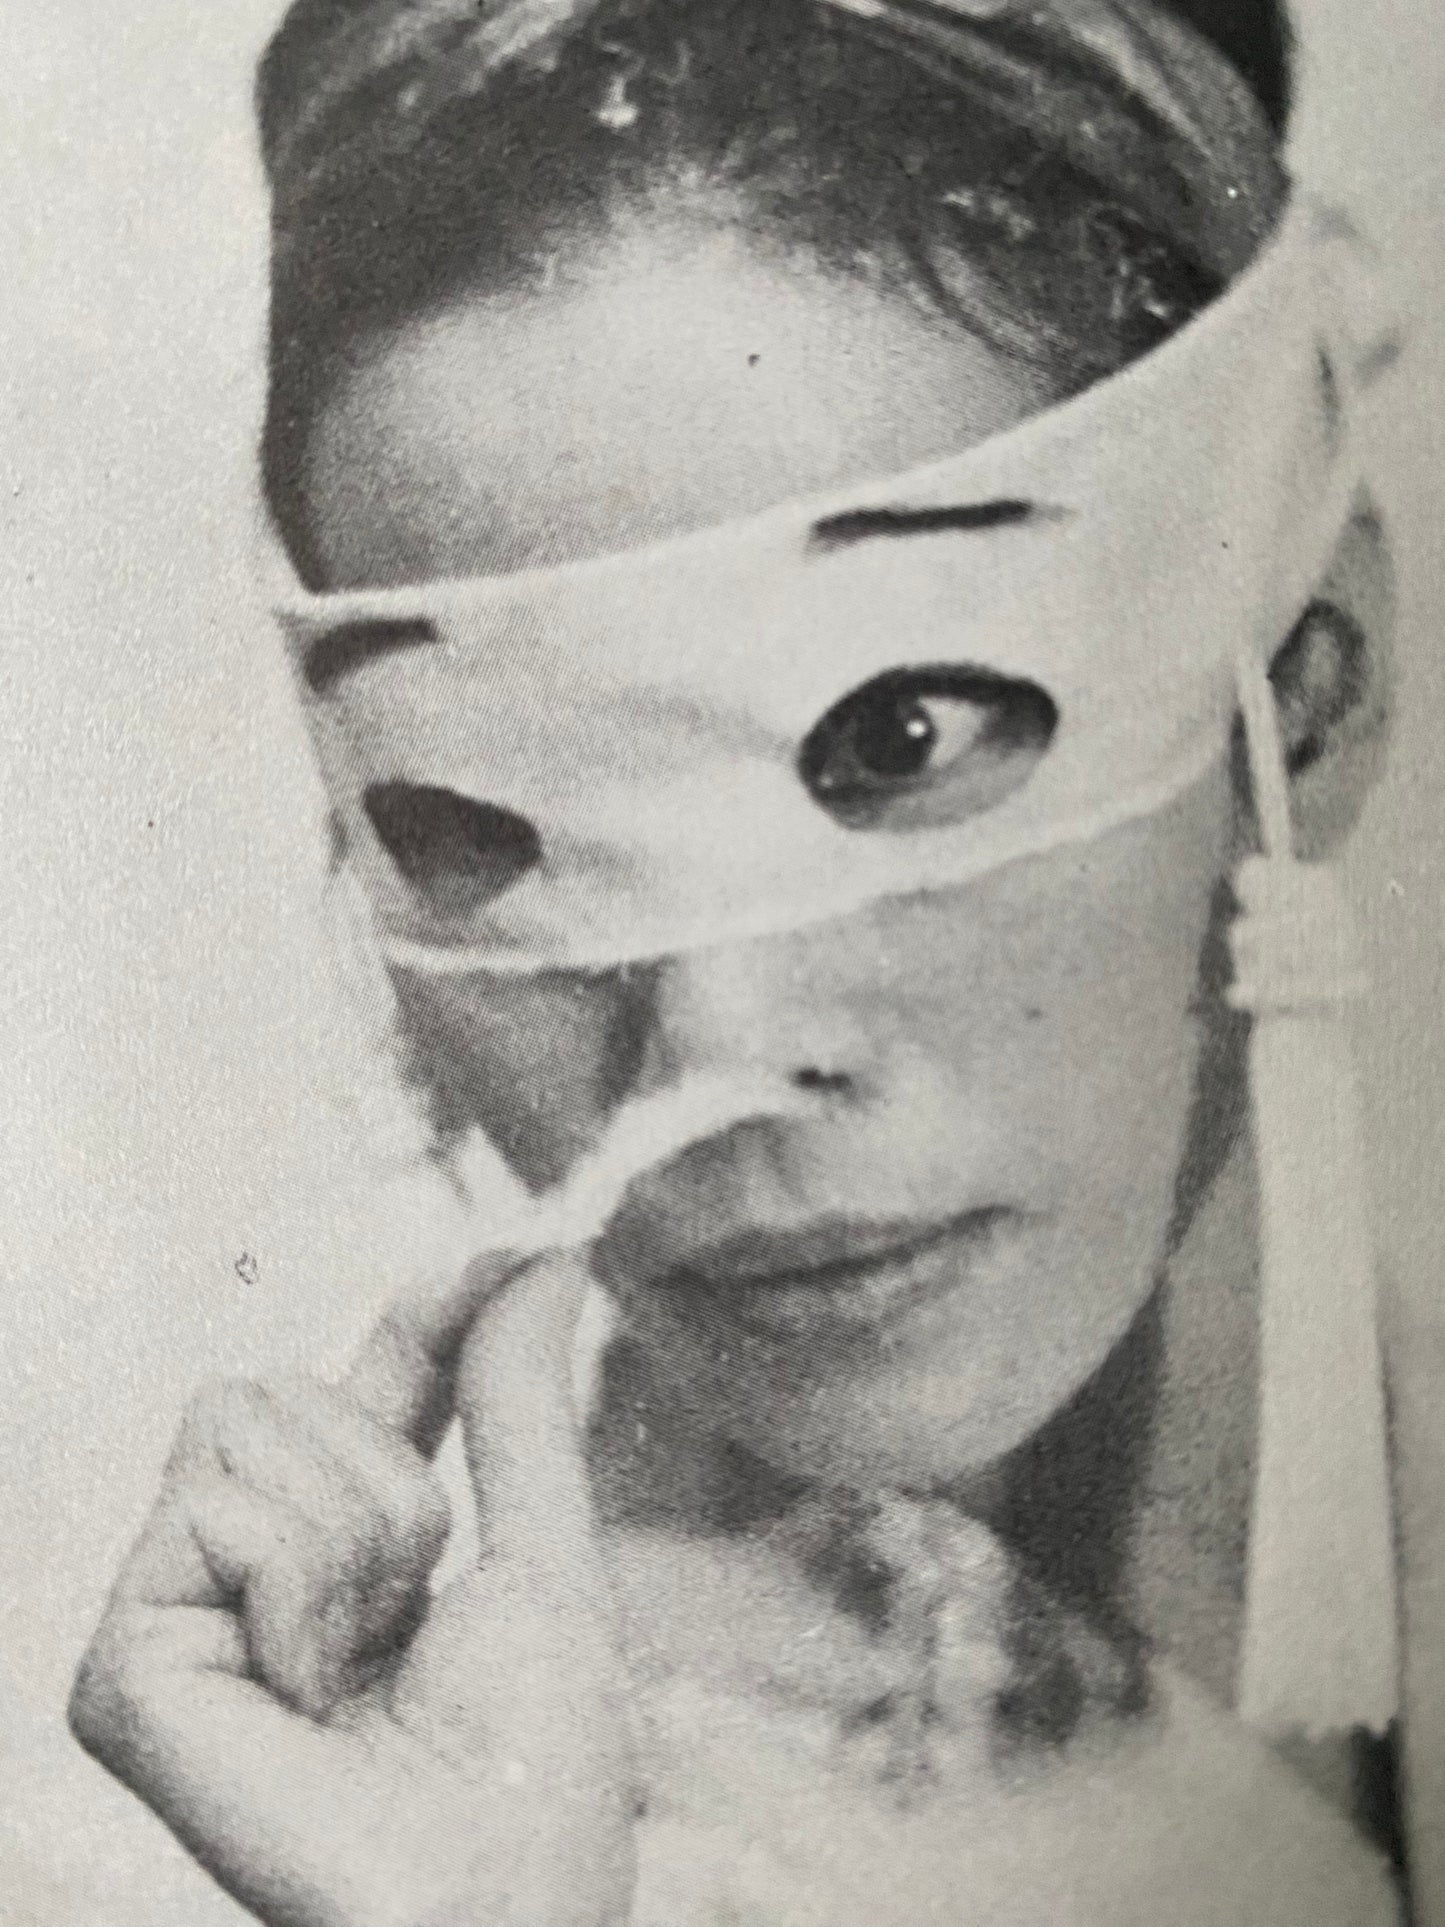 Shindai: The Art Of Japanese Bed Fighting (1965)